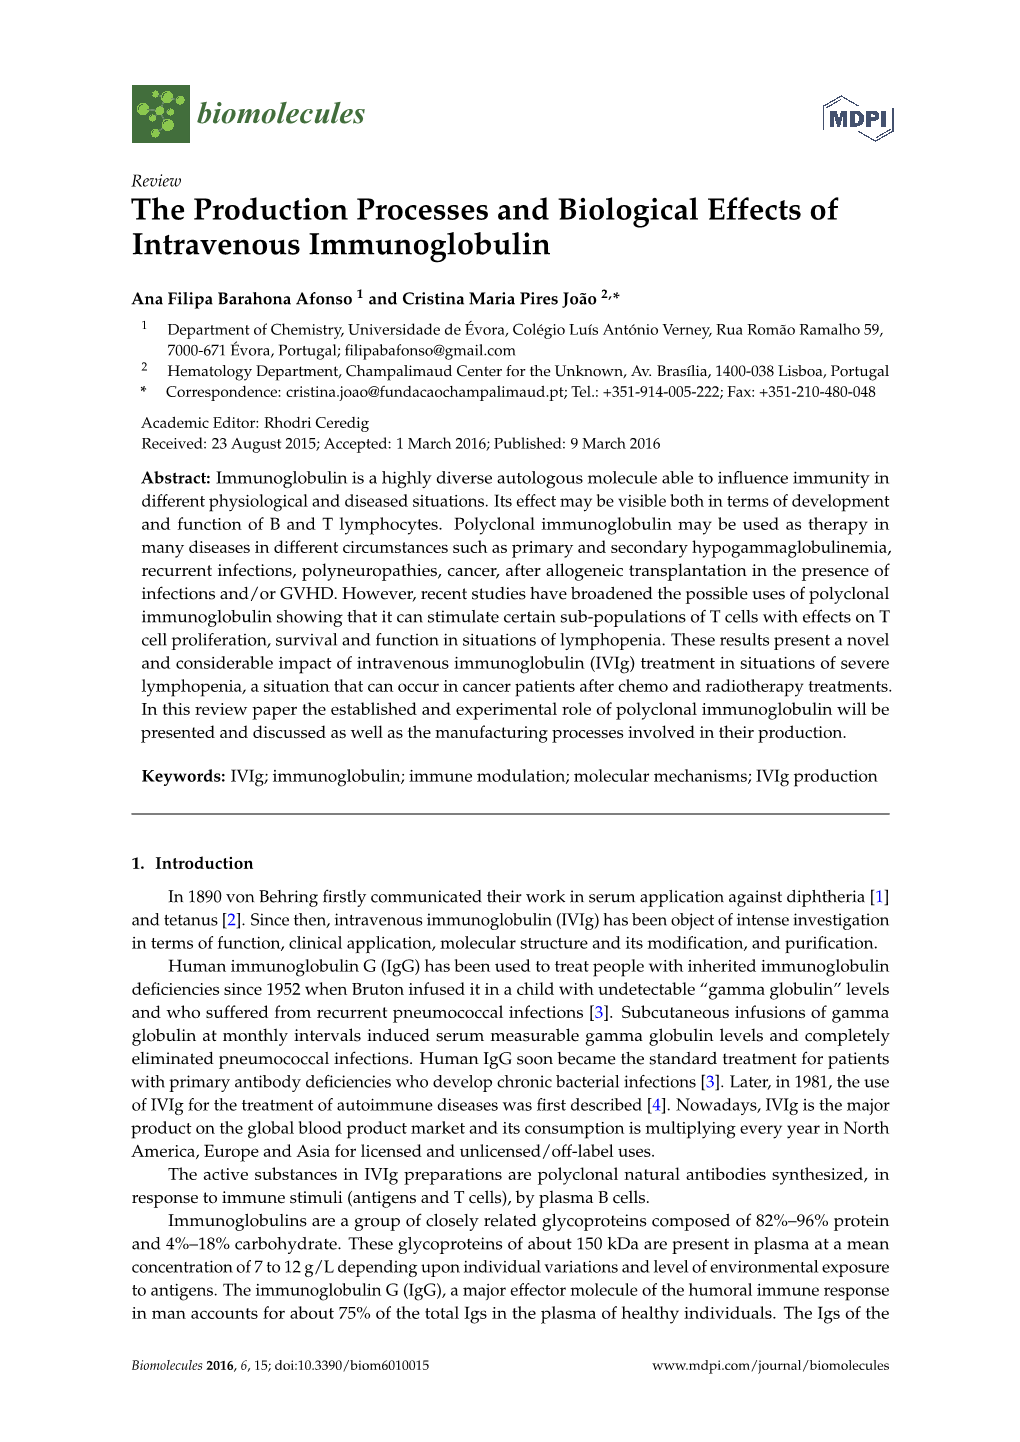 The Production Processes and Biological Effects of Intravenous Immunoglobulin